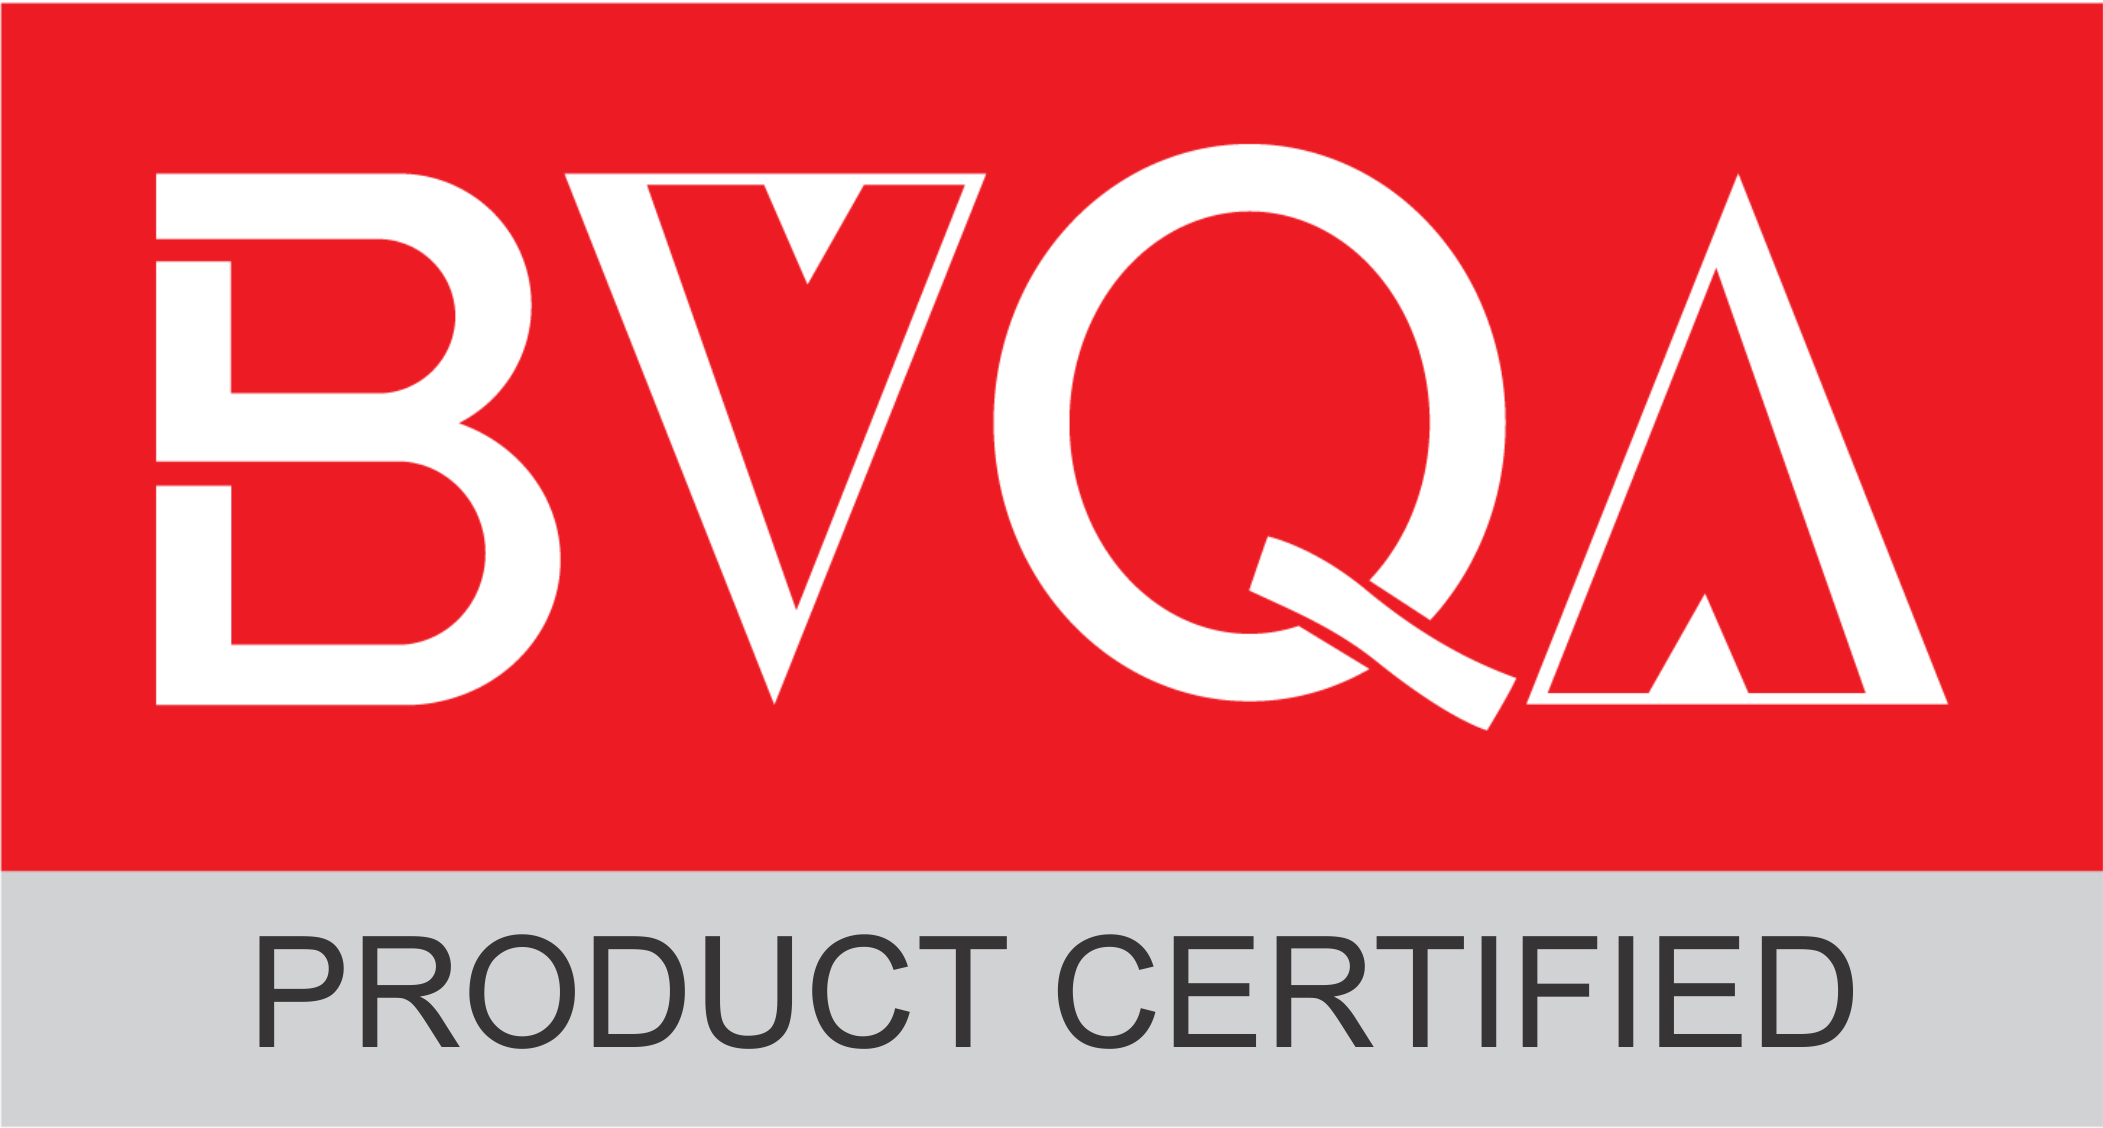 BVQA Vietnam was licensed to issue Product Certification of Construction materials